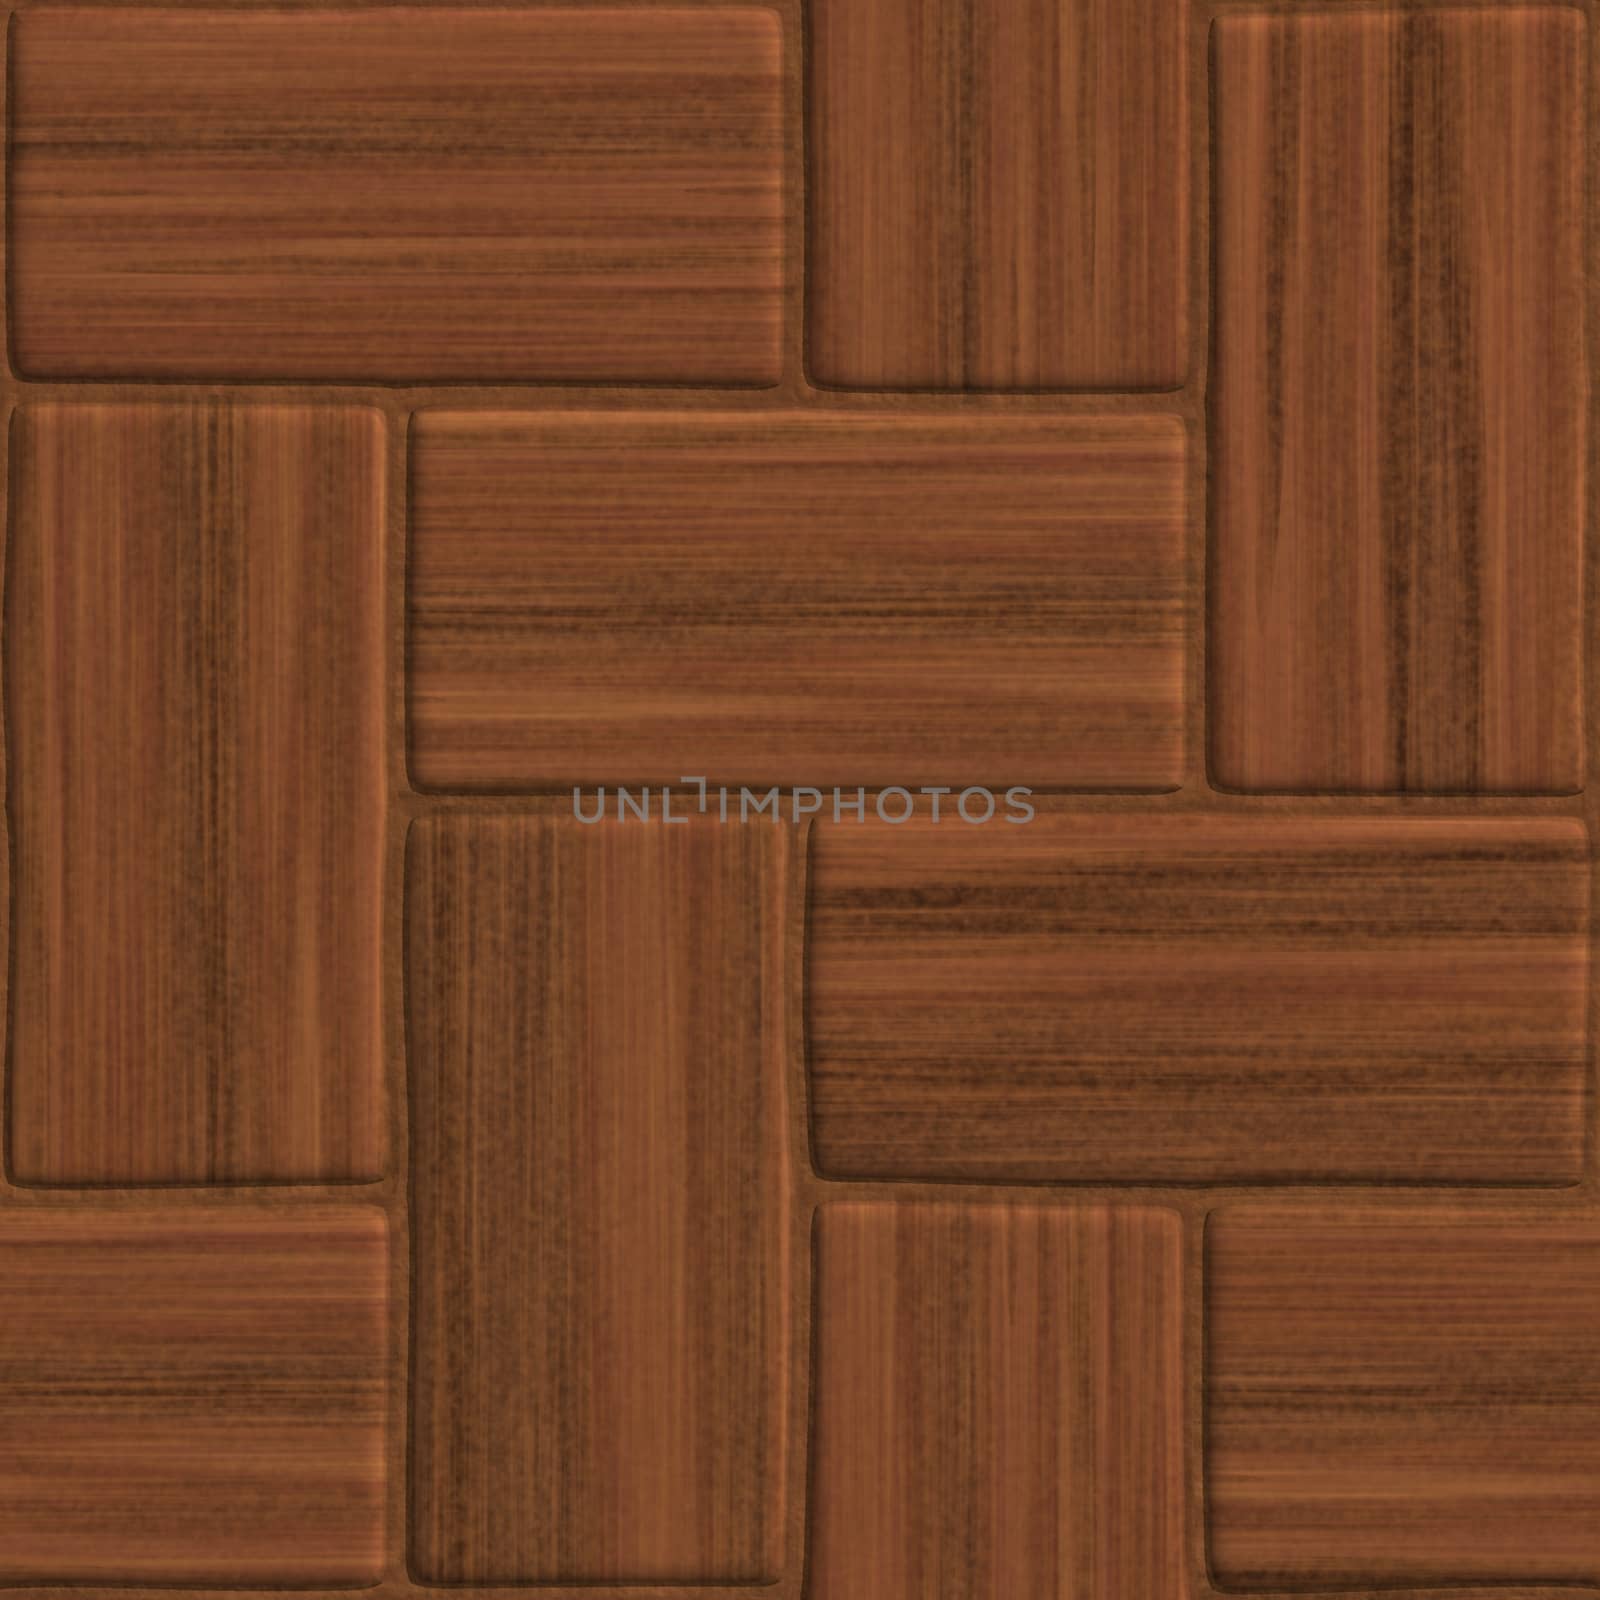 Wood floor seamless tileable decorative background pattern.